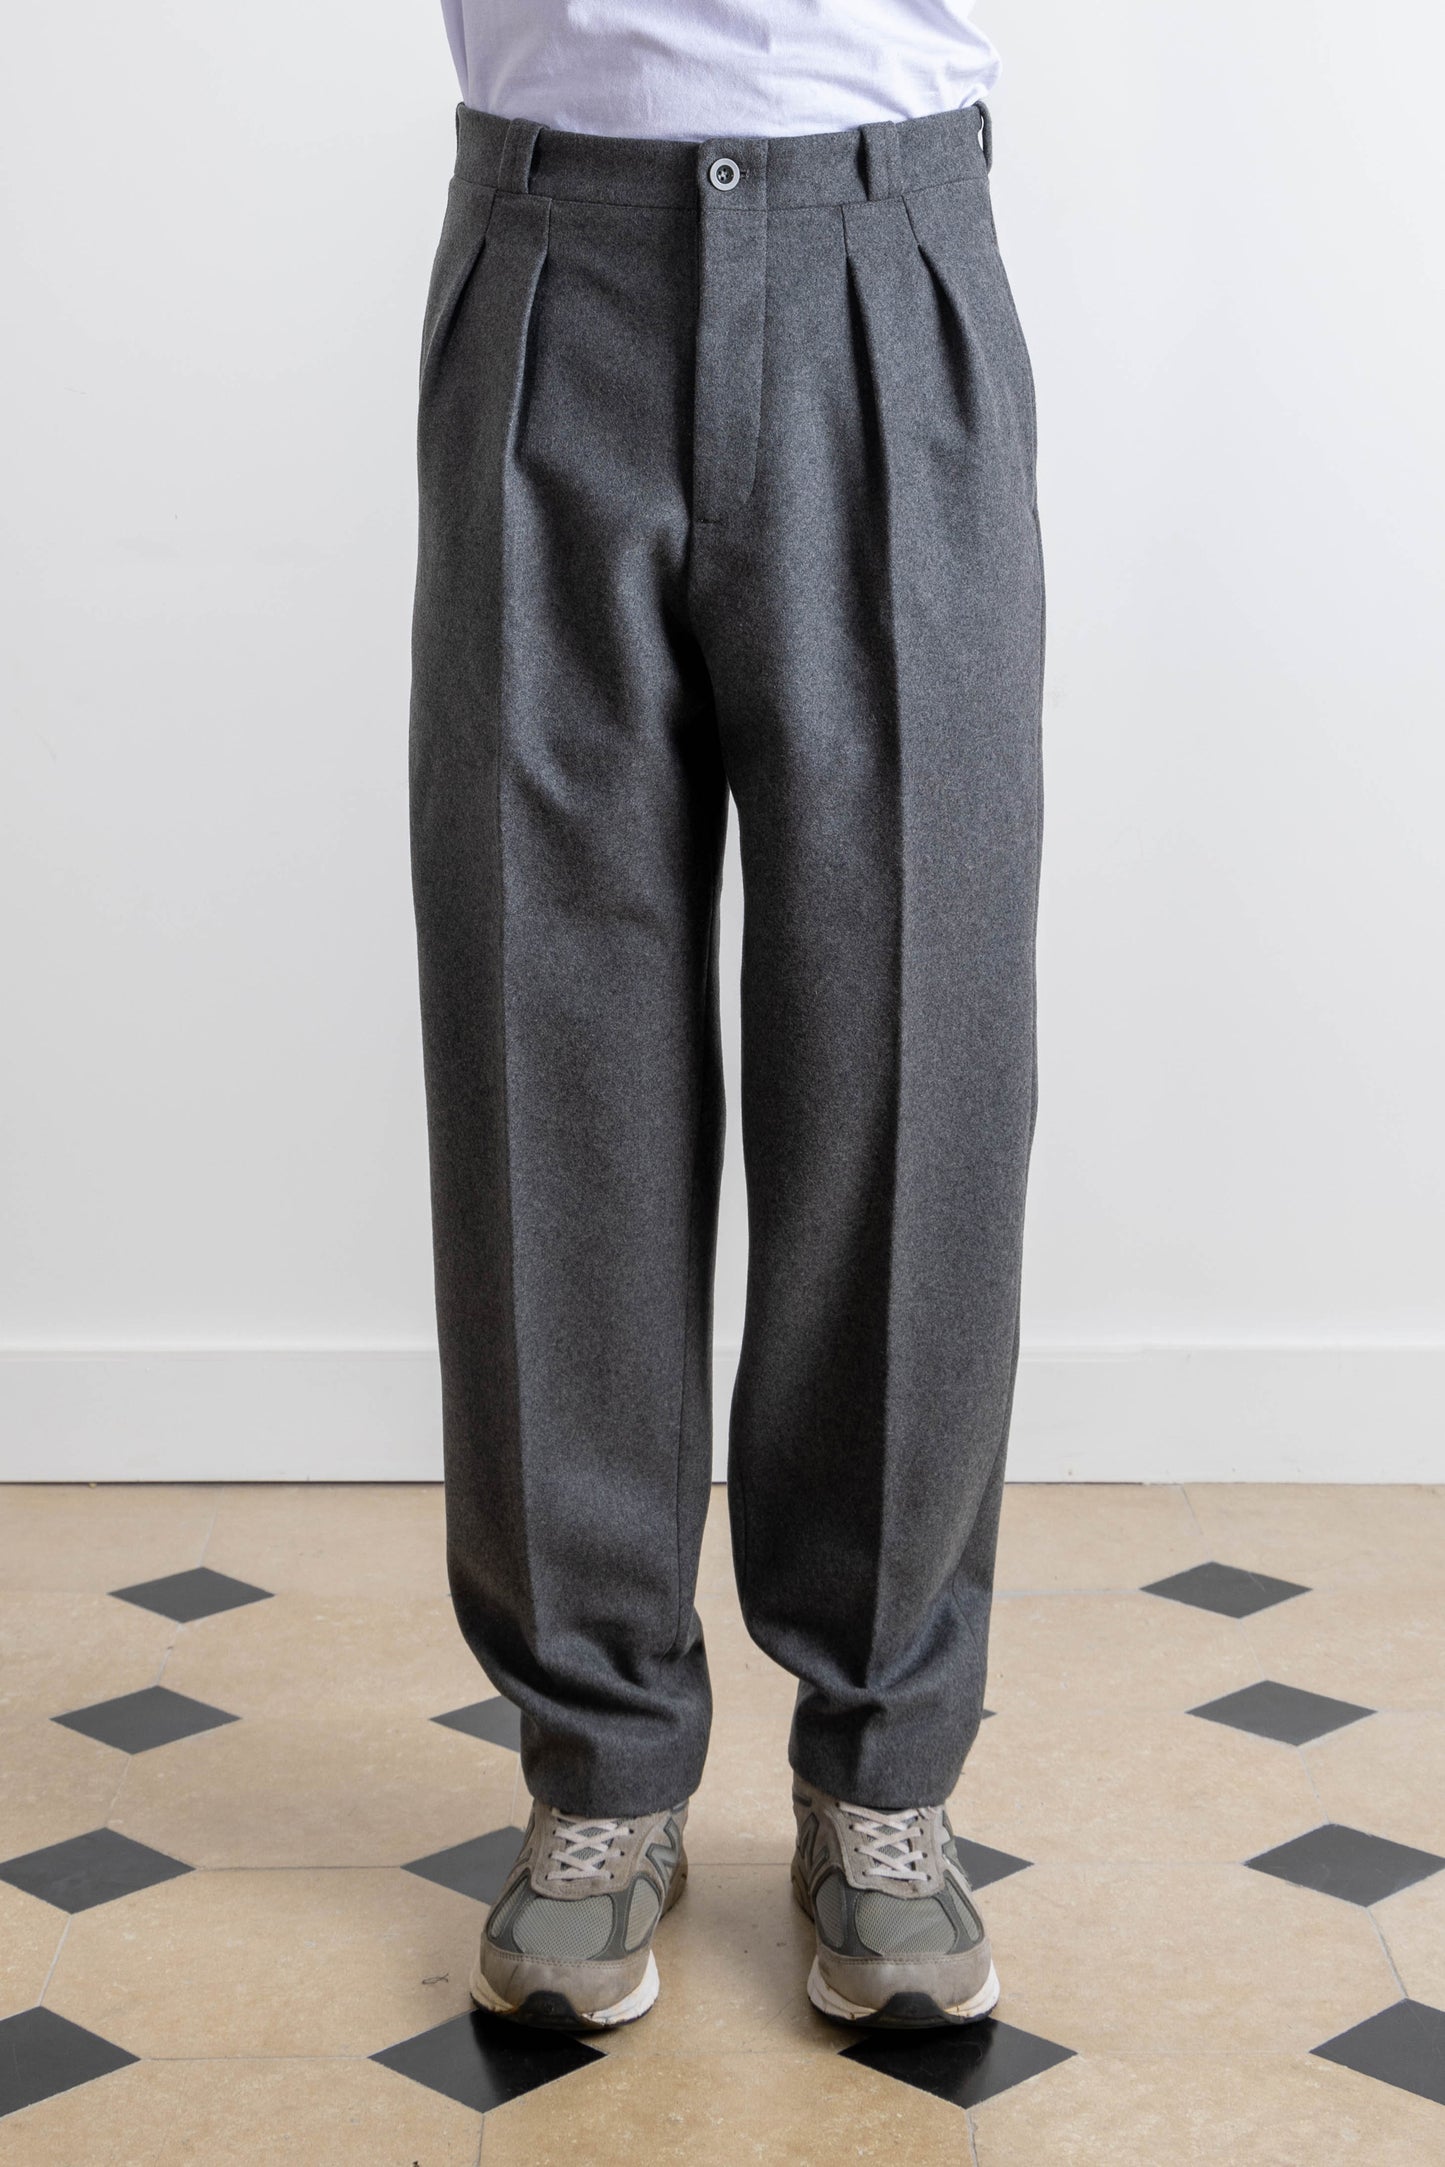 French Military trousers in gray wool